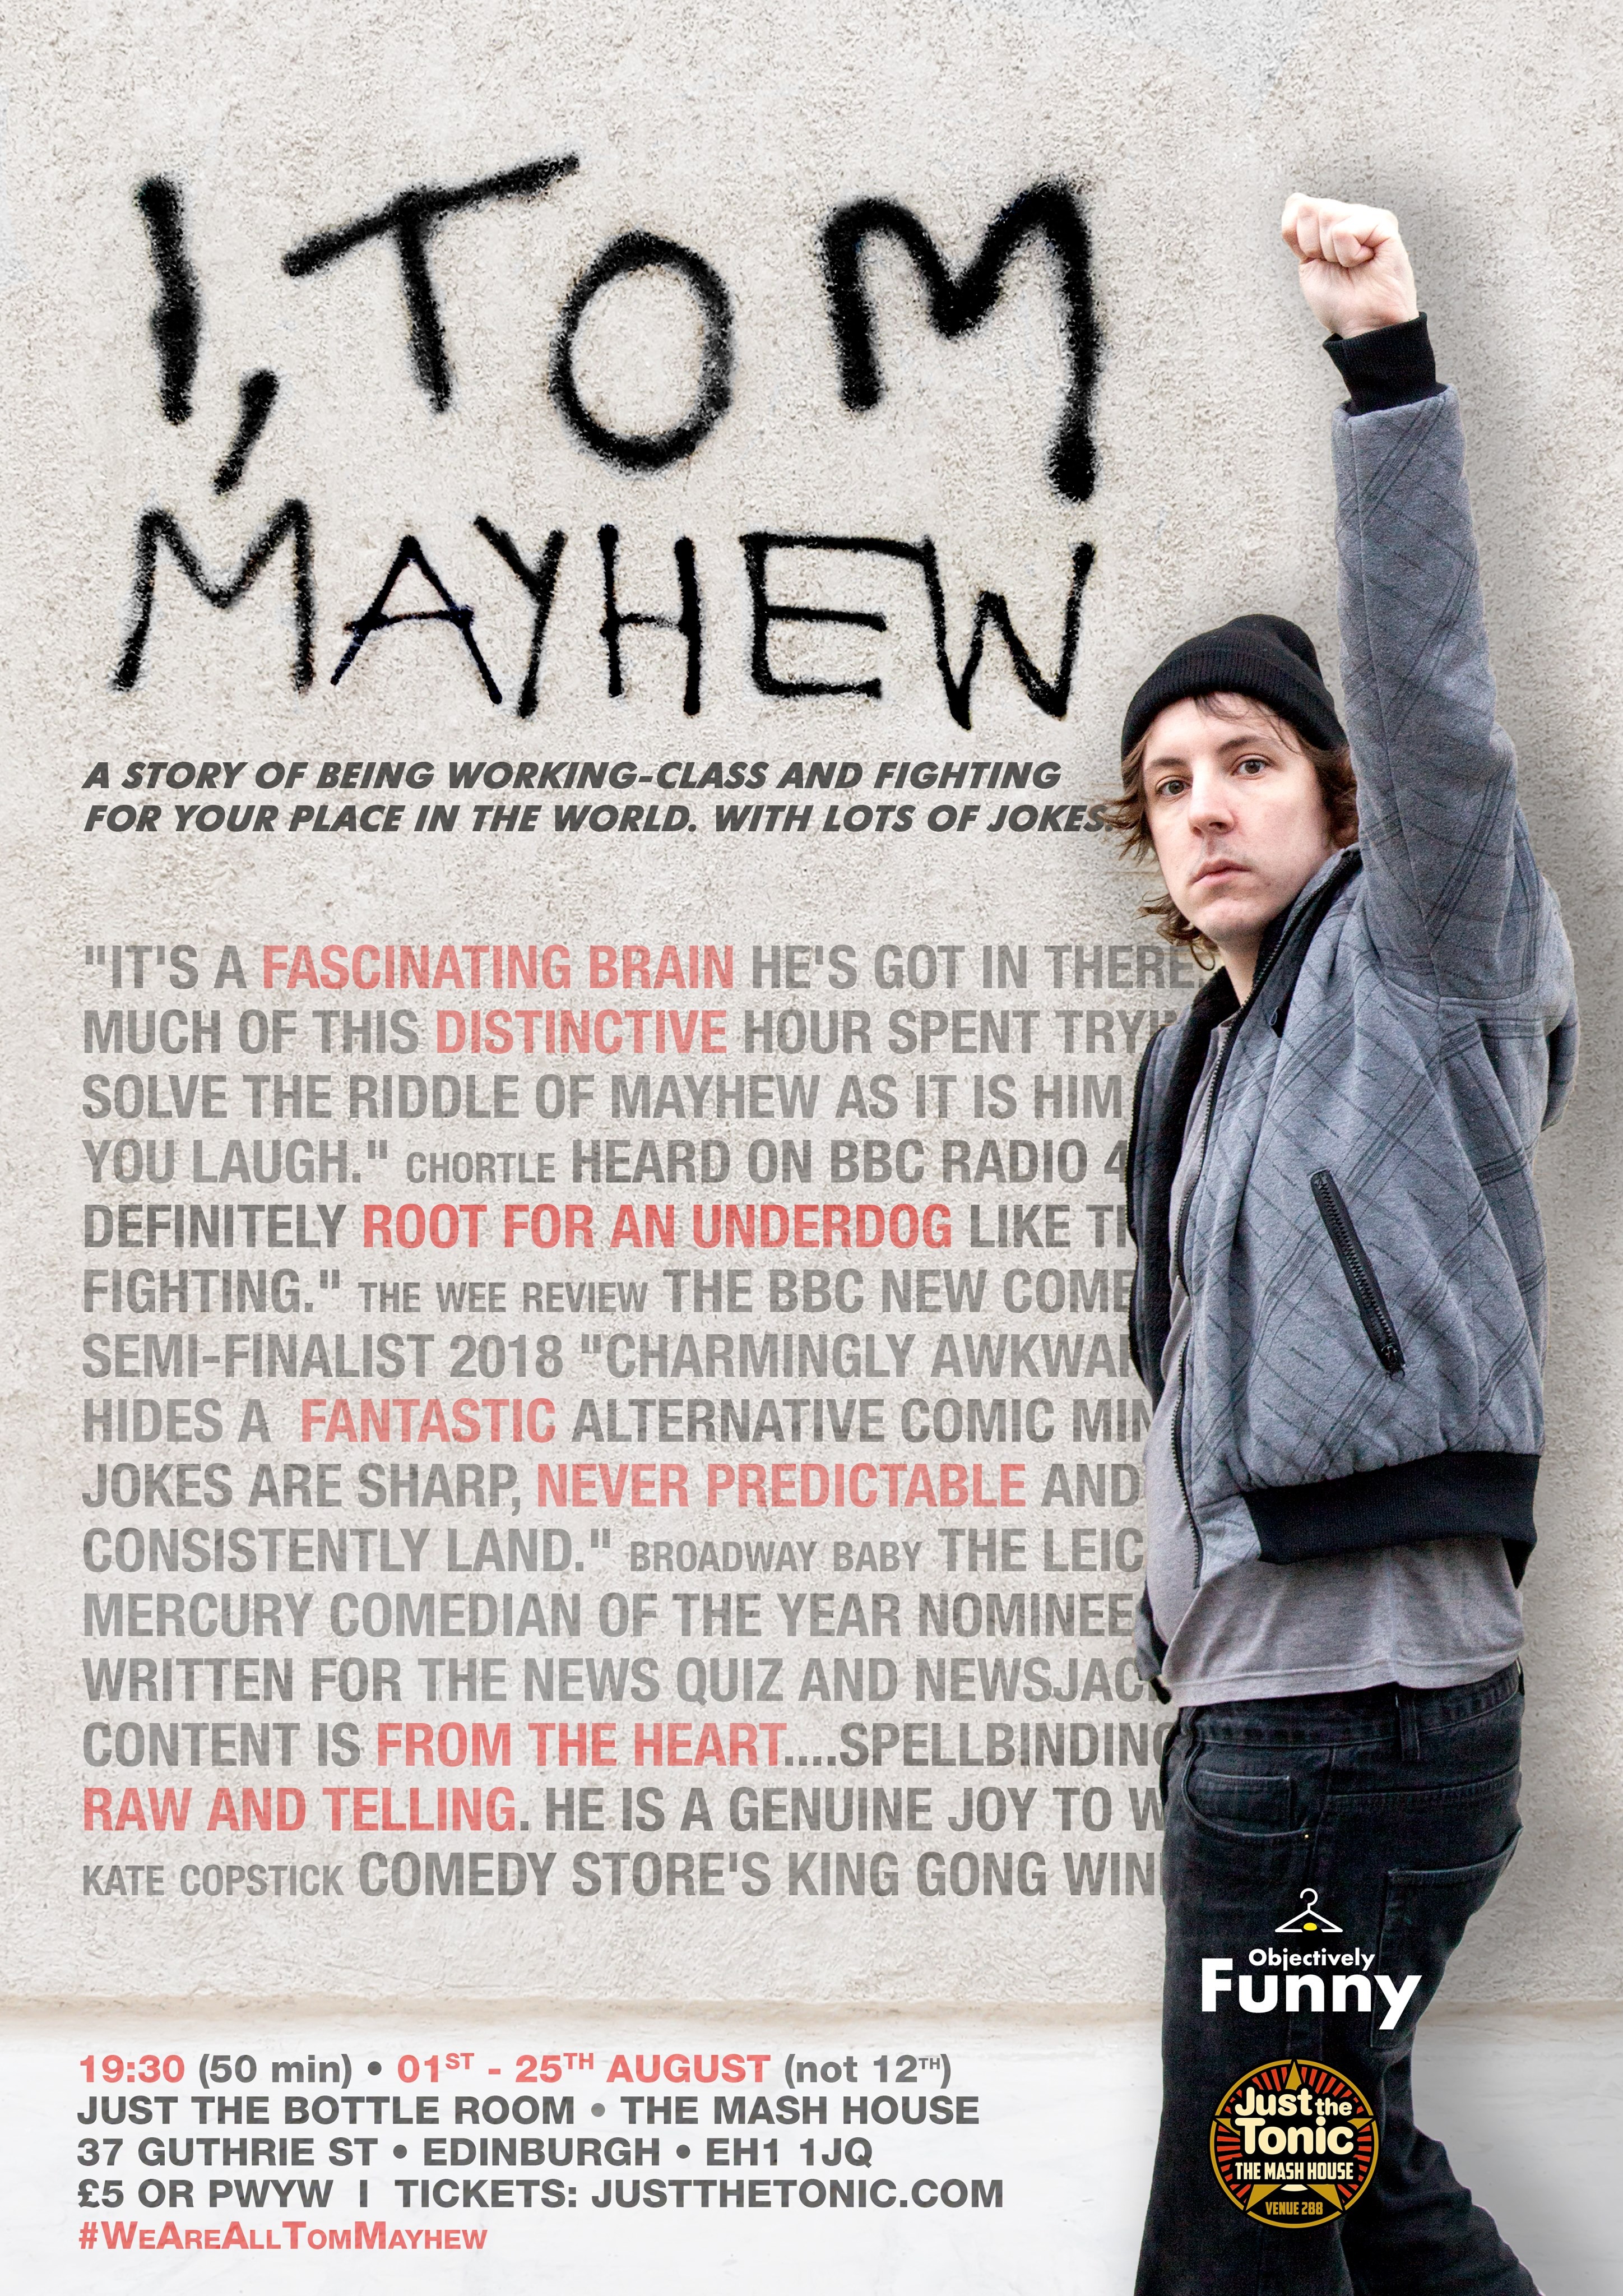 The poster for I, Tom Mayhew